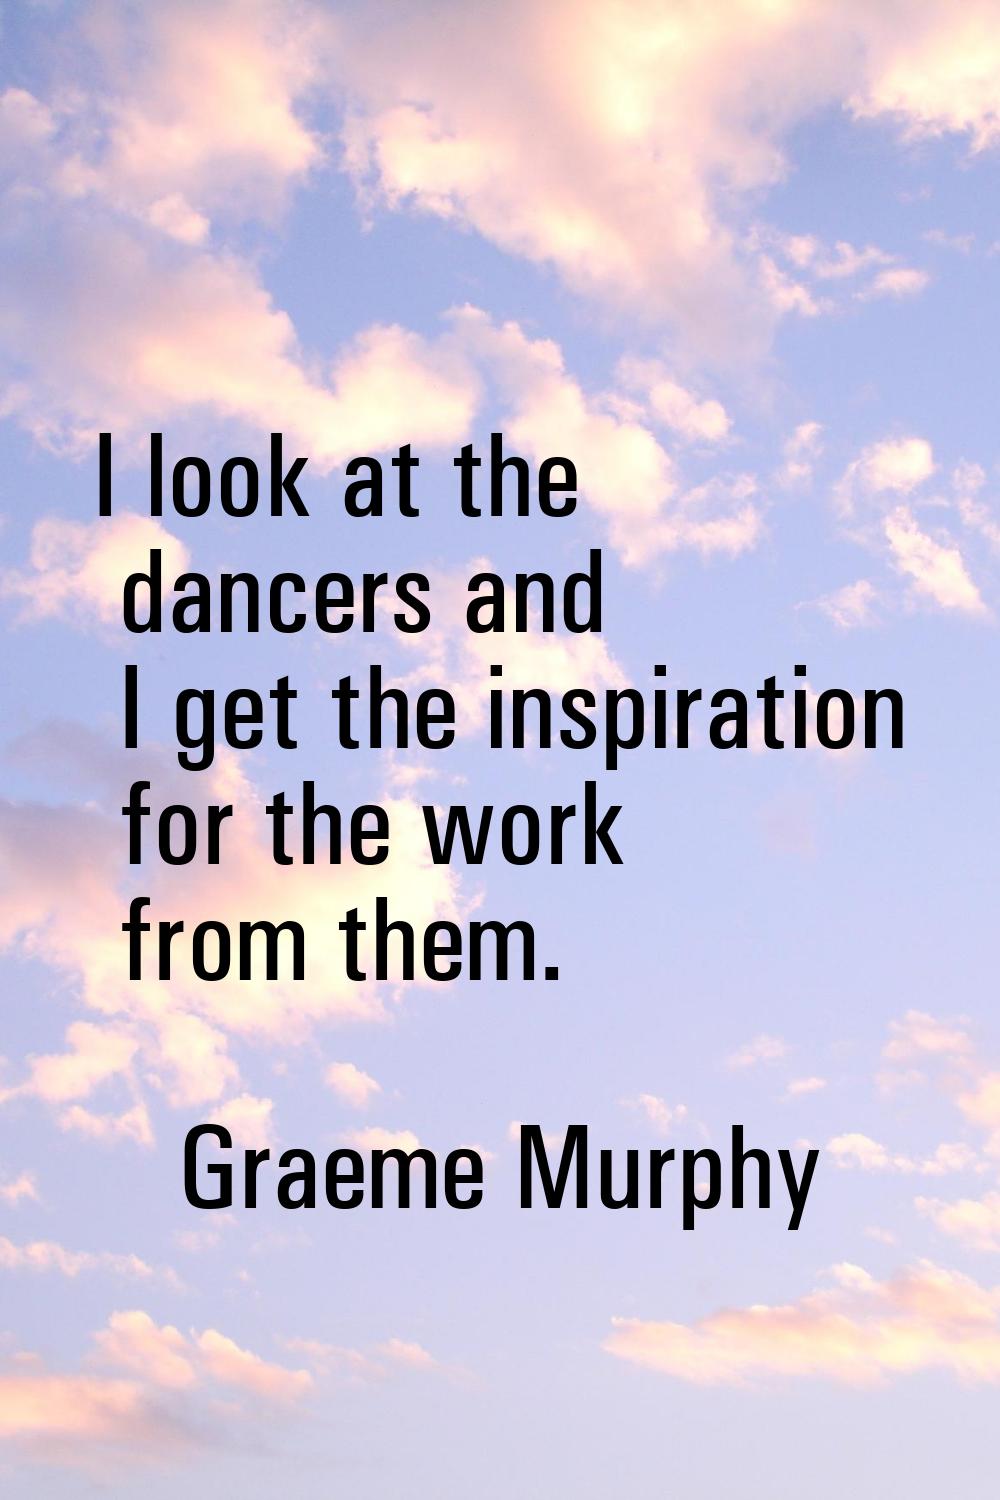 I look at the dancers and I get the inspiration for the work from them.